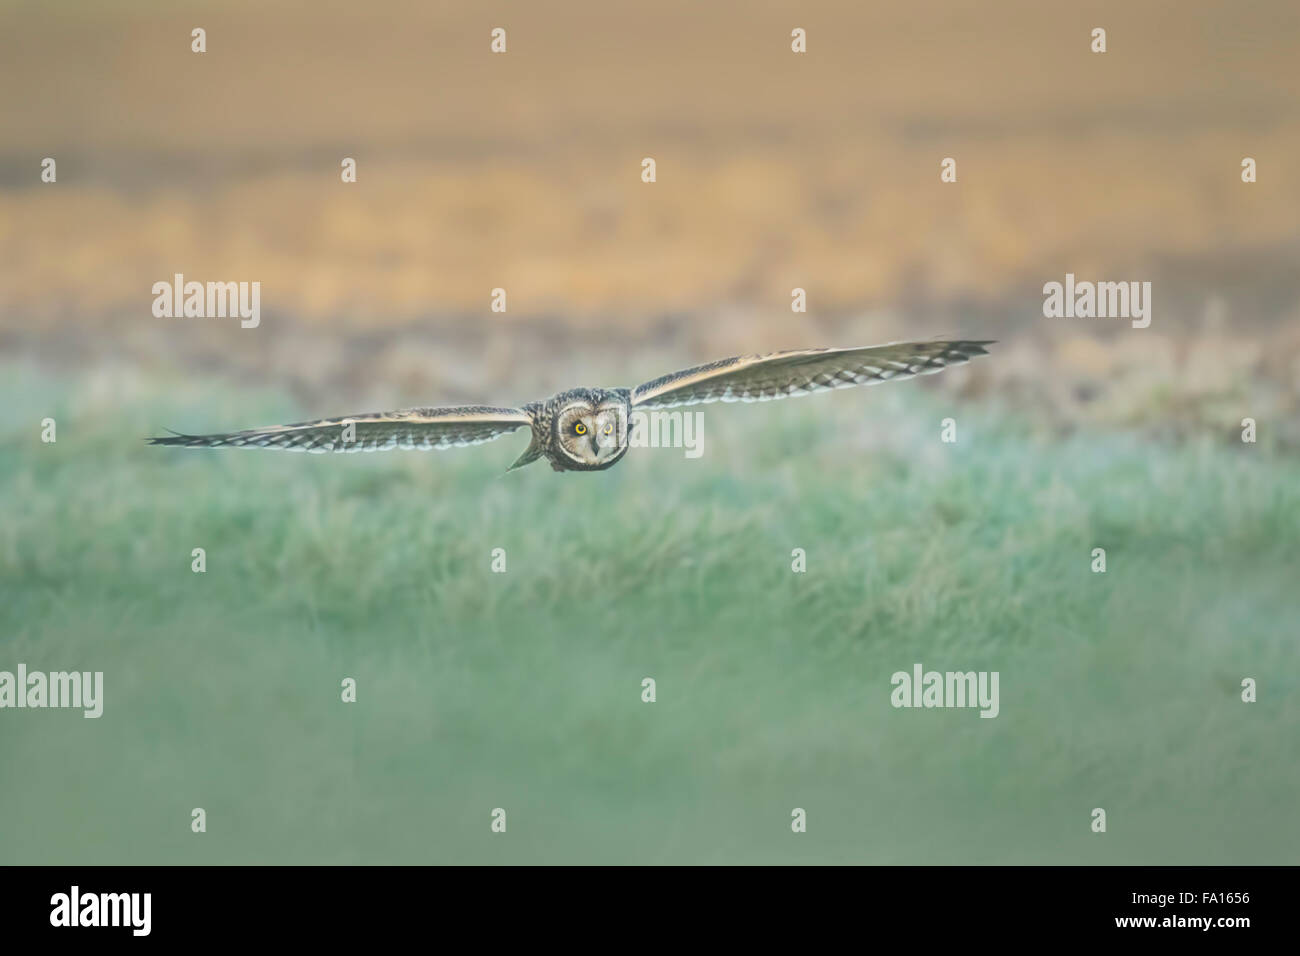 Short-eared Owl (Asio flammeus) hunting above a field during dusk in winter. Stock Photo